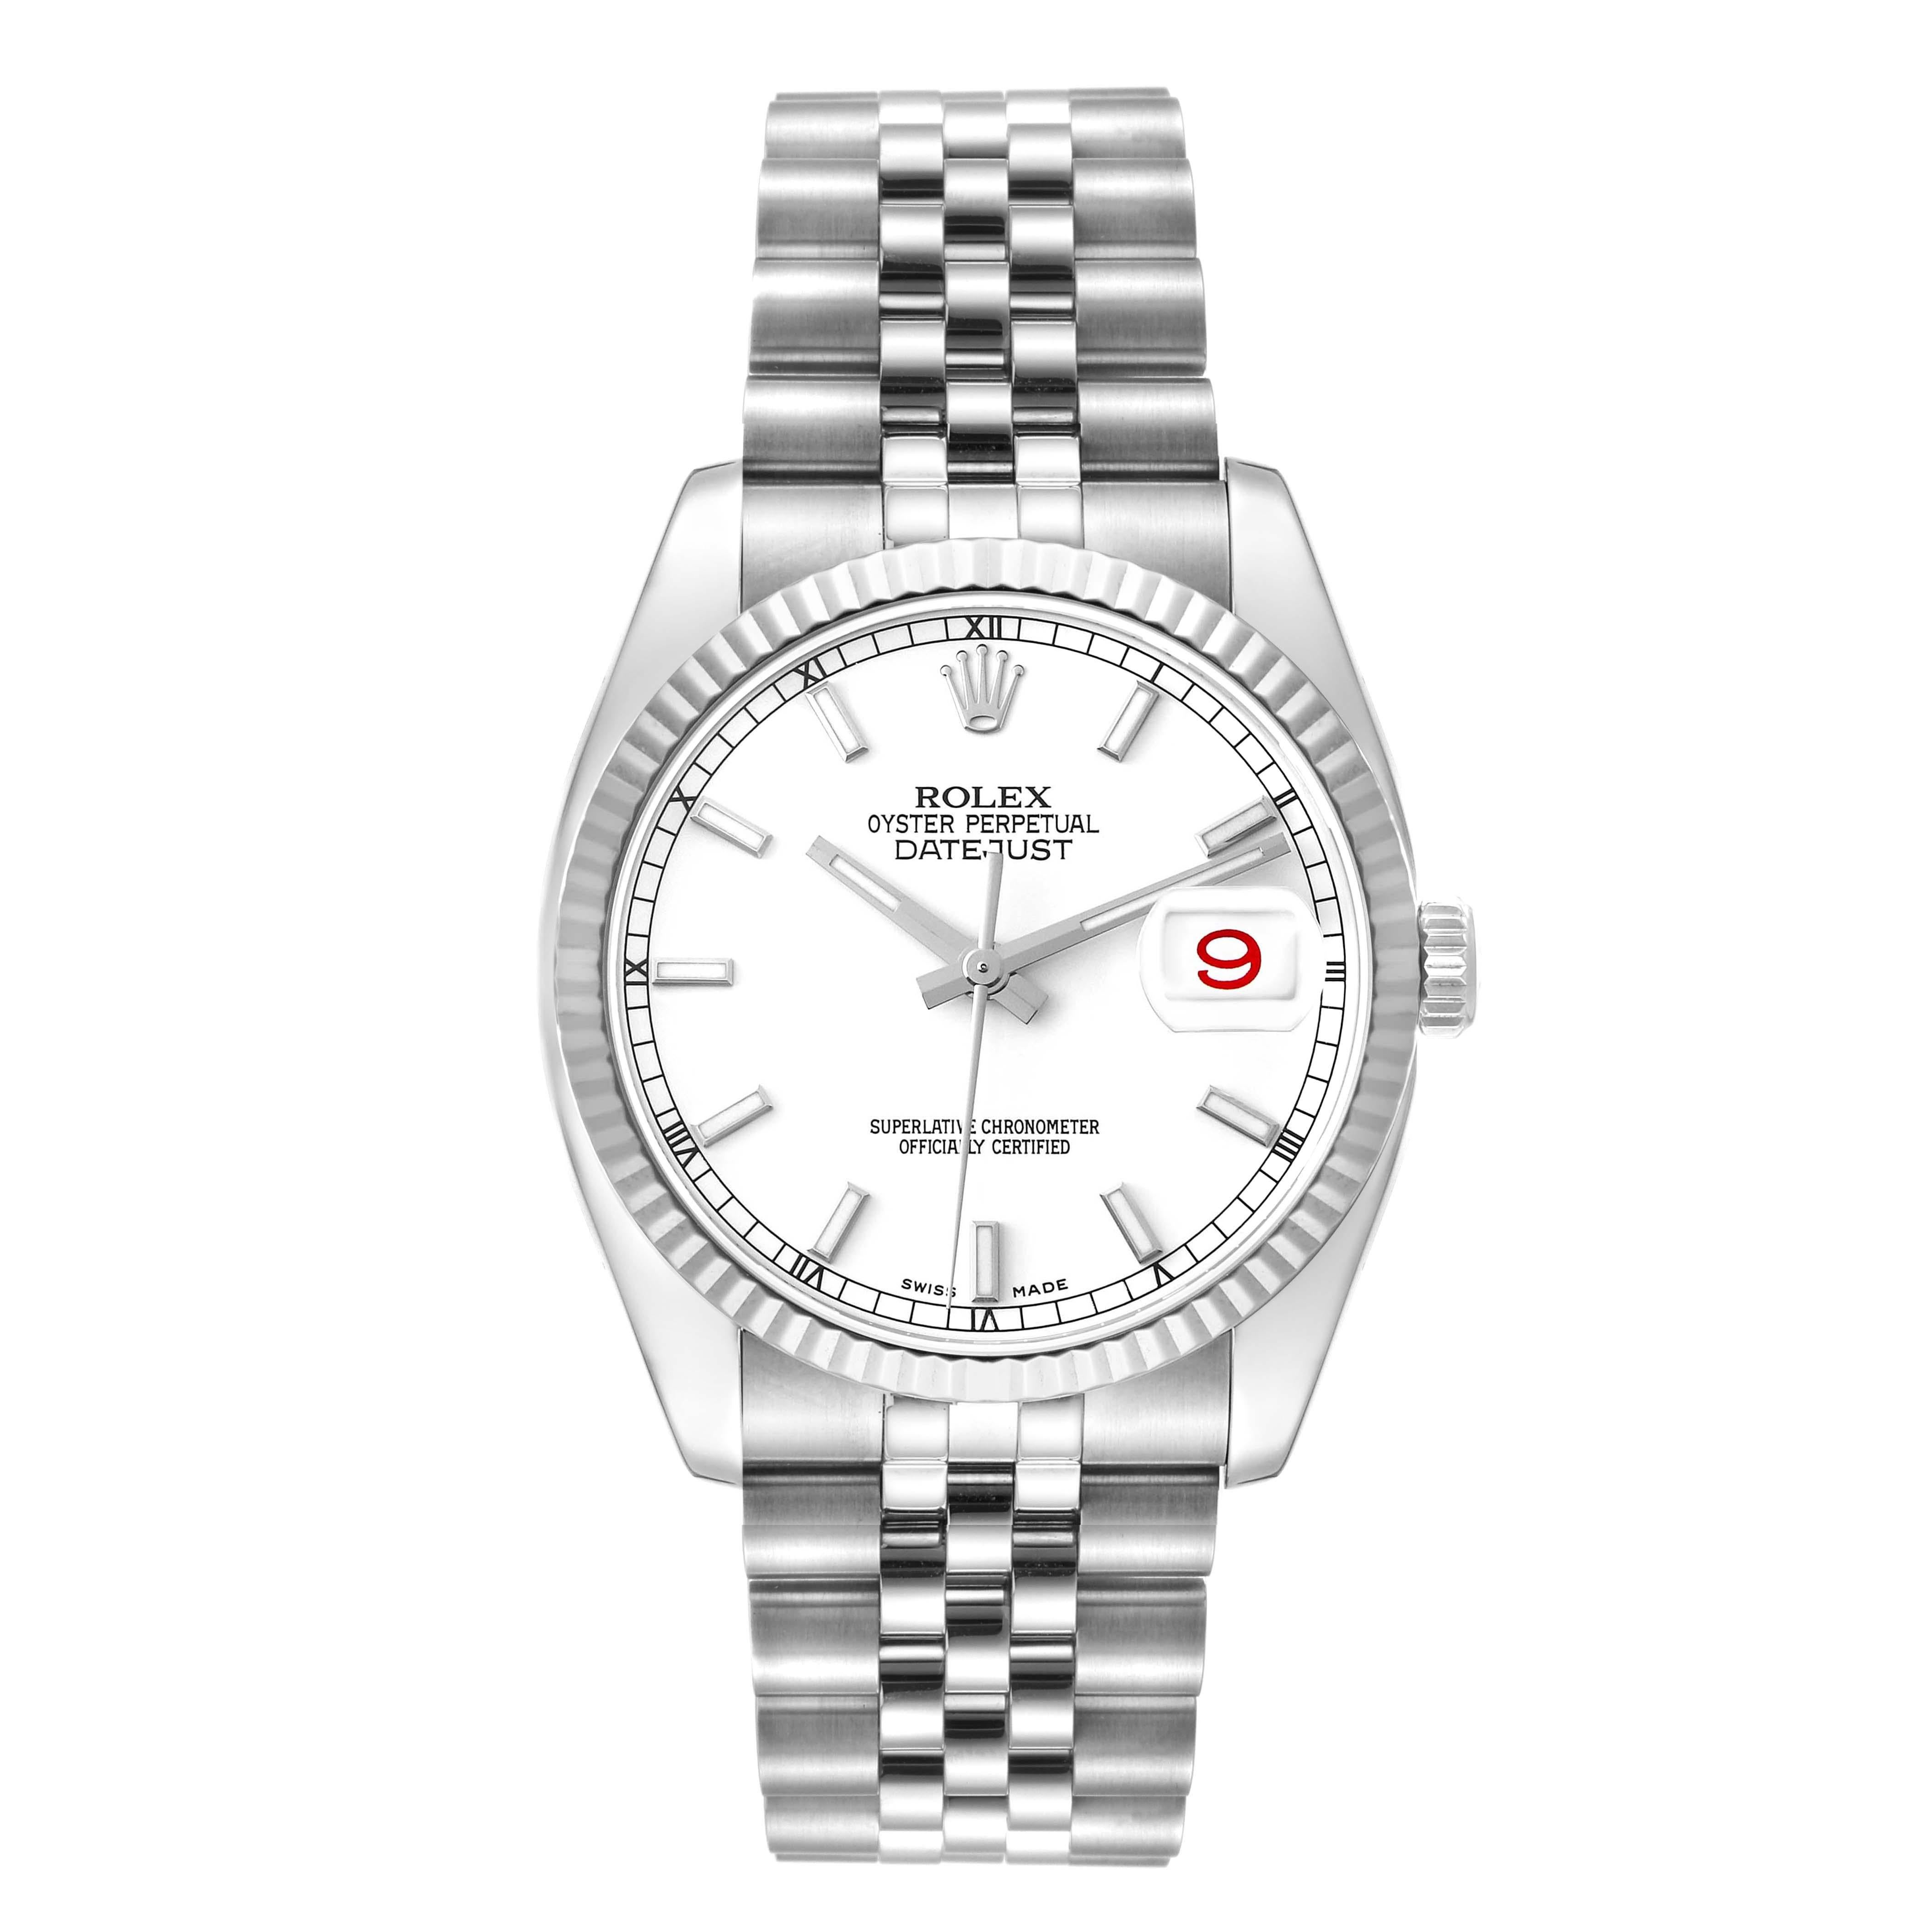 Rolex Datejust Steel White Gold Jubilee Bracelet Watch 116234. Officially certified chronometer self-winding movement with quickset date. Stainless steel case 36.0 mm in diameter. High polished lugs. Rolex logo on a crown. 18K white gold fluted